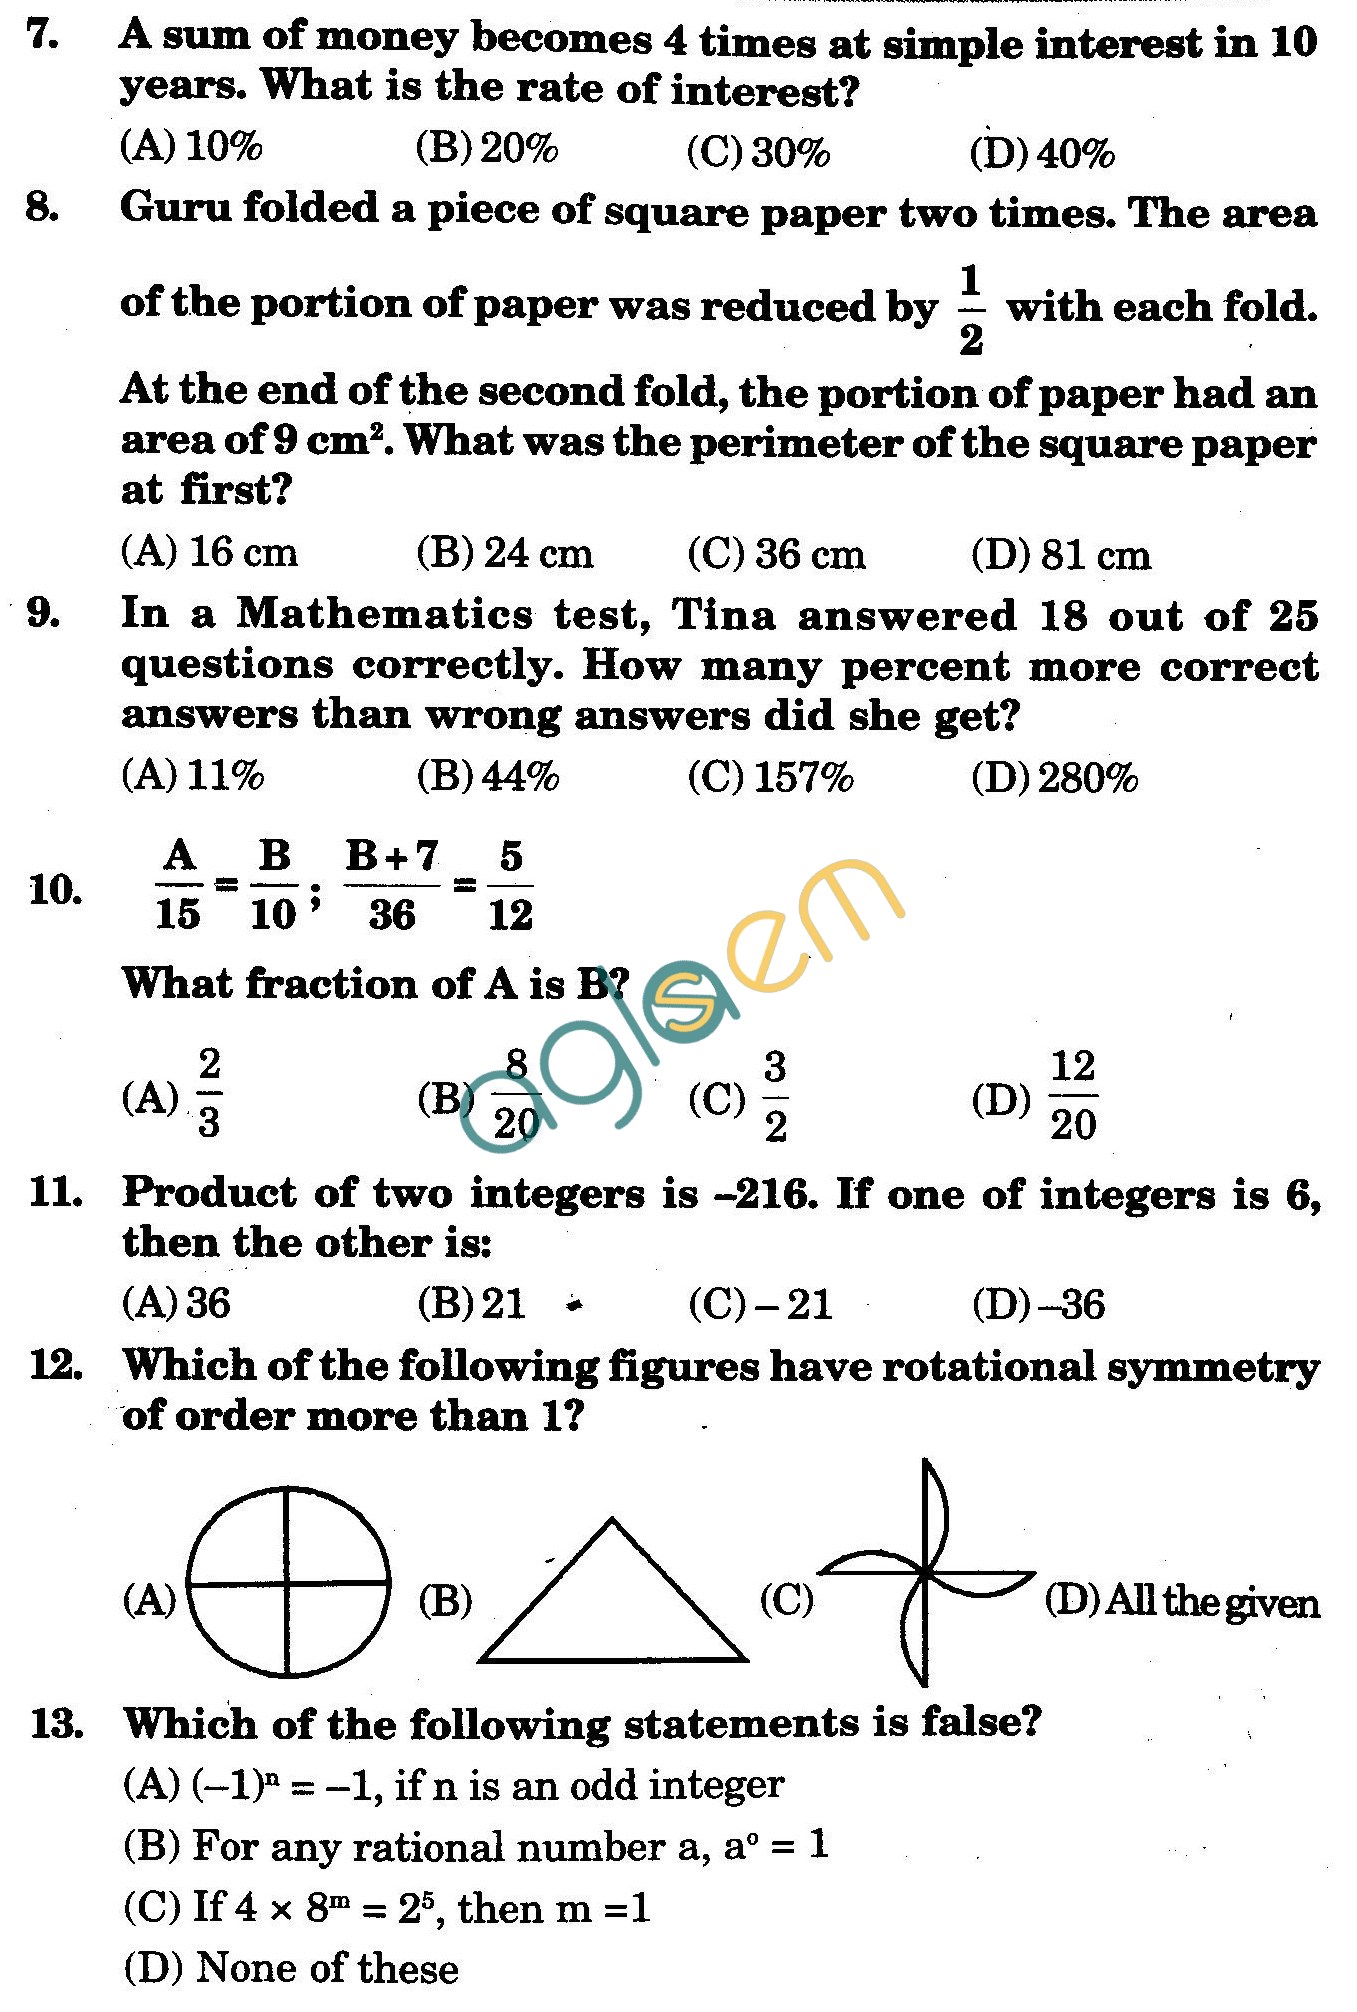 NSTSE 2010 Class VII Question Paper with Answers - Mathematics